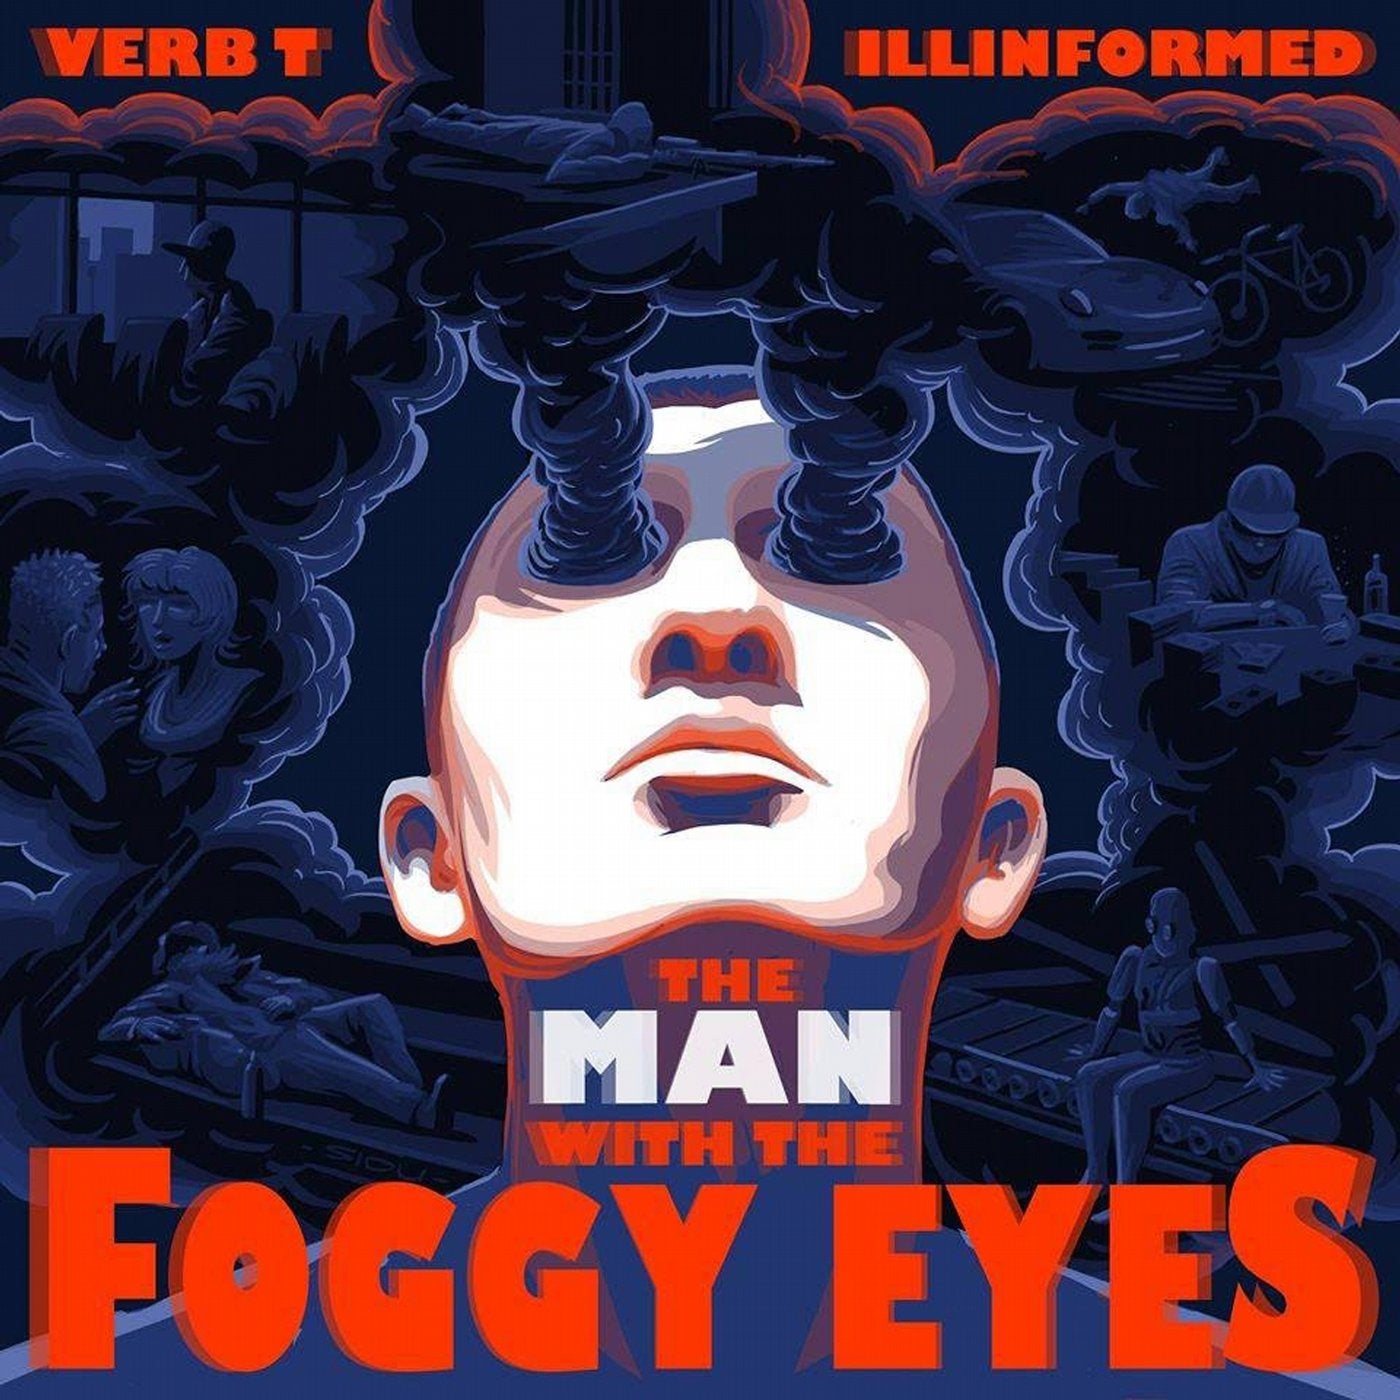 The Man with the Foggy Eyes